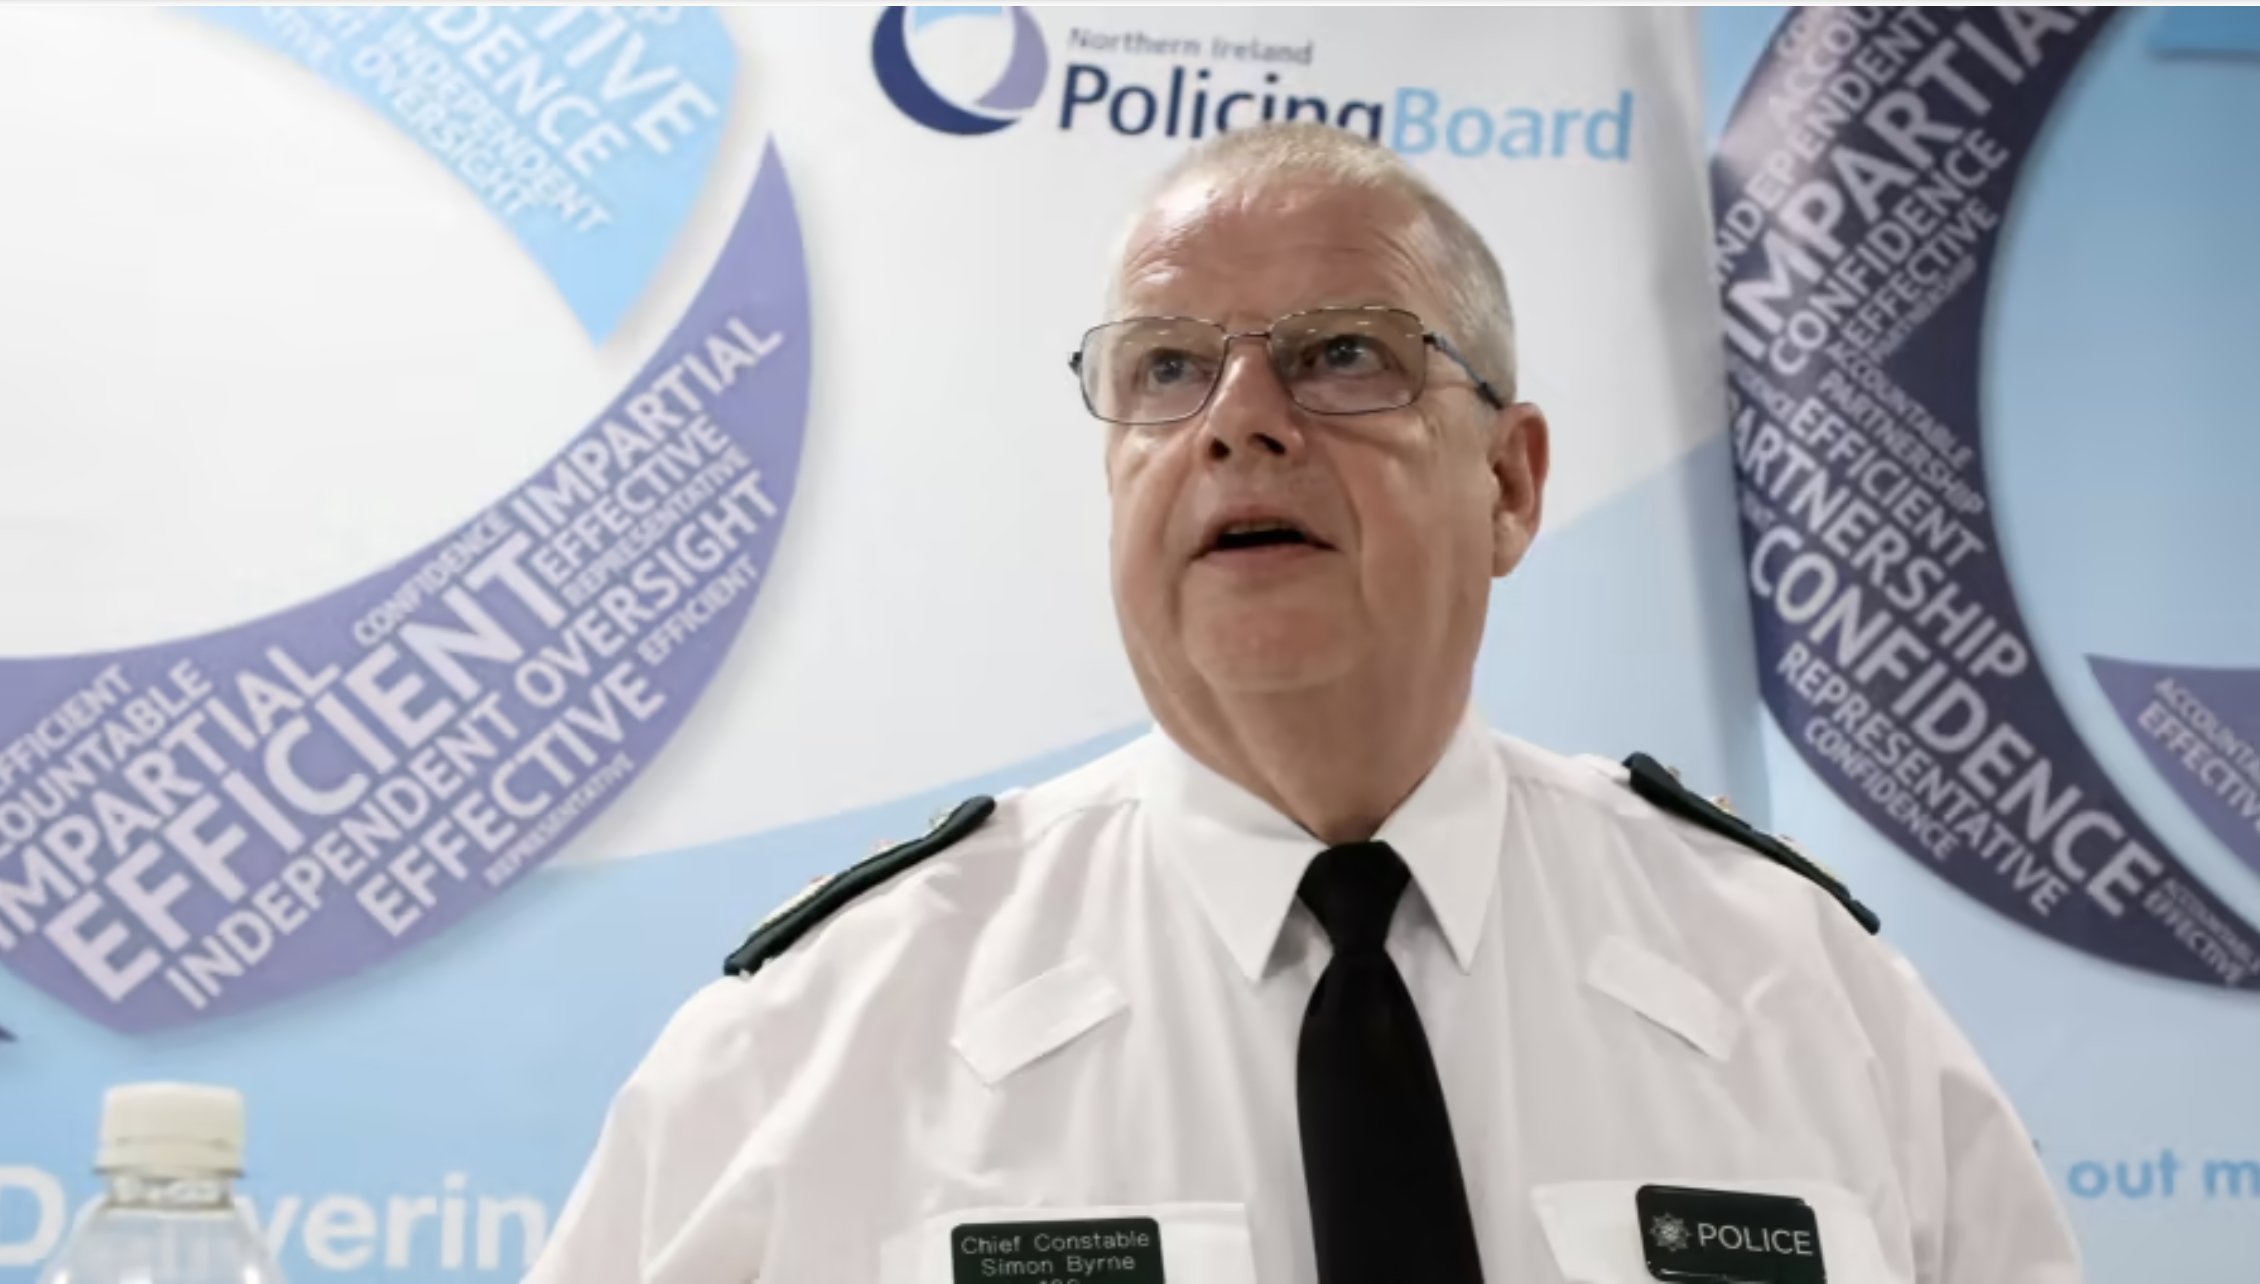 Professor Kevin Curran, Ulster University in an interview with Vigour Times on the need to emphasise the need for consistency in enforcing data protection regulations and questioned why the police should be exempt.